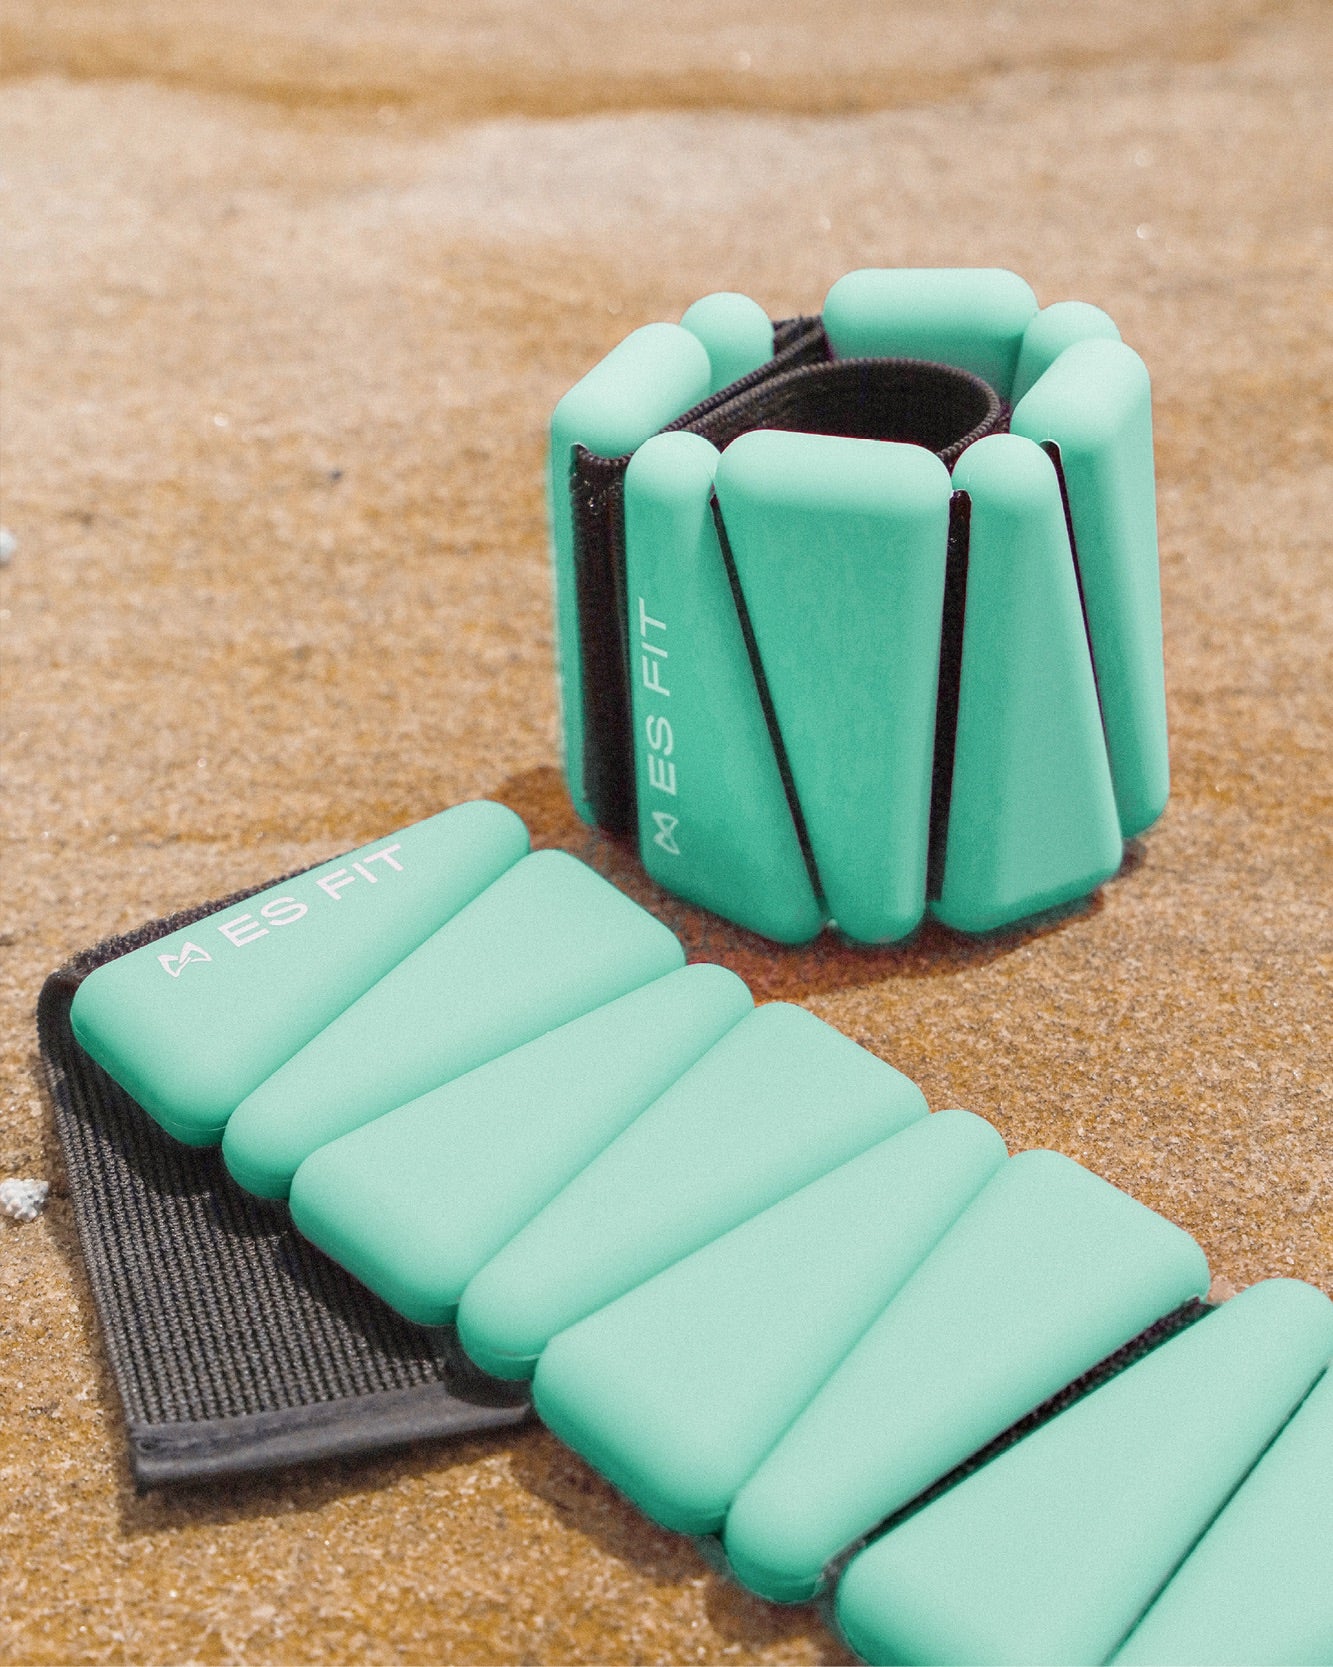 Adjustable & versatile Australian Ankle Weights & Wrist Weights. Use for a variety of benefits & workout exercises. Great for walking, pilates, toning + more.